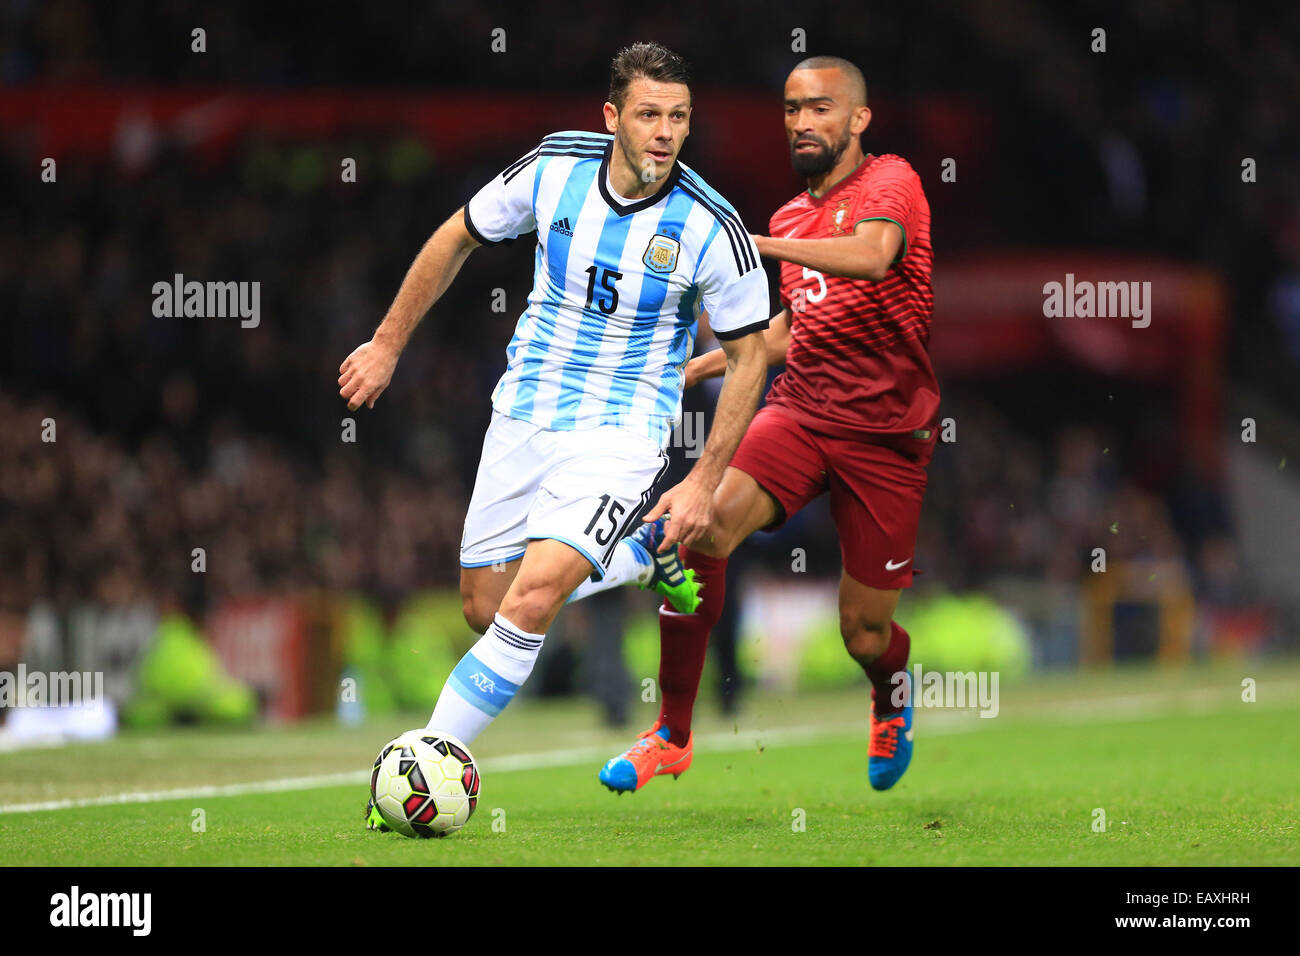 Manchester, UK. 18th Nov, 2014. Martin Demichelis of Argentina escapes Jose Bosingwa of Portugal - Argentina vs. Portugal - International Friendly - Old Trafford - Manchester - 18/11/2014 Pic Philip Oldham/Sportimage. © csm/Alamy Live News Stock Photo